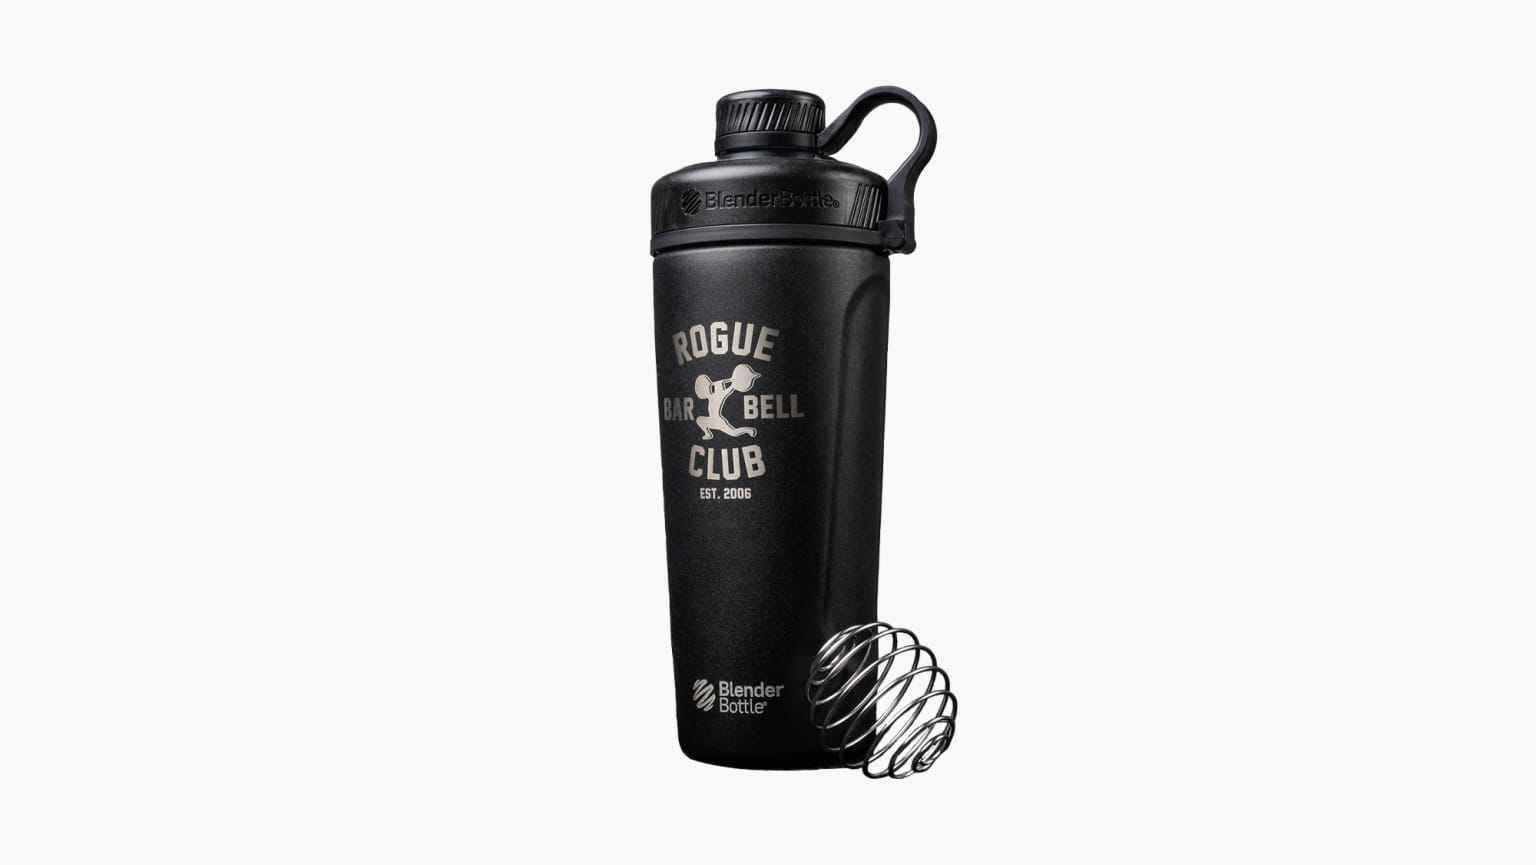 Muscle Gear USA Radian Insulated Stainless Steel Blender Bottle